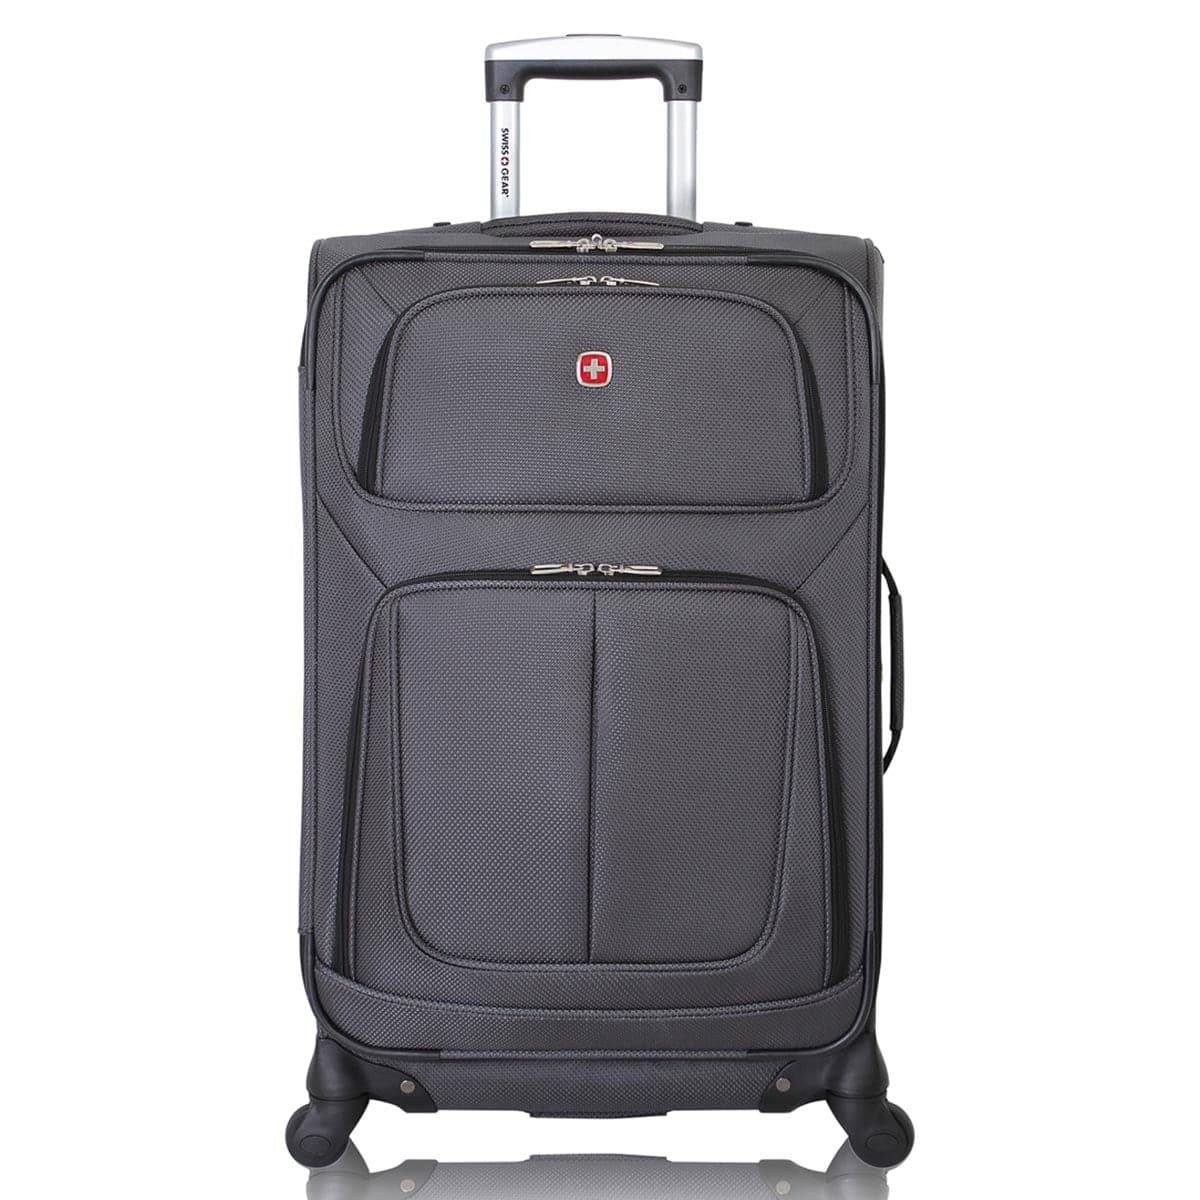 SwissGear 25" Expandable 4-Wheel Check-In Luggage